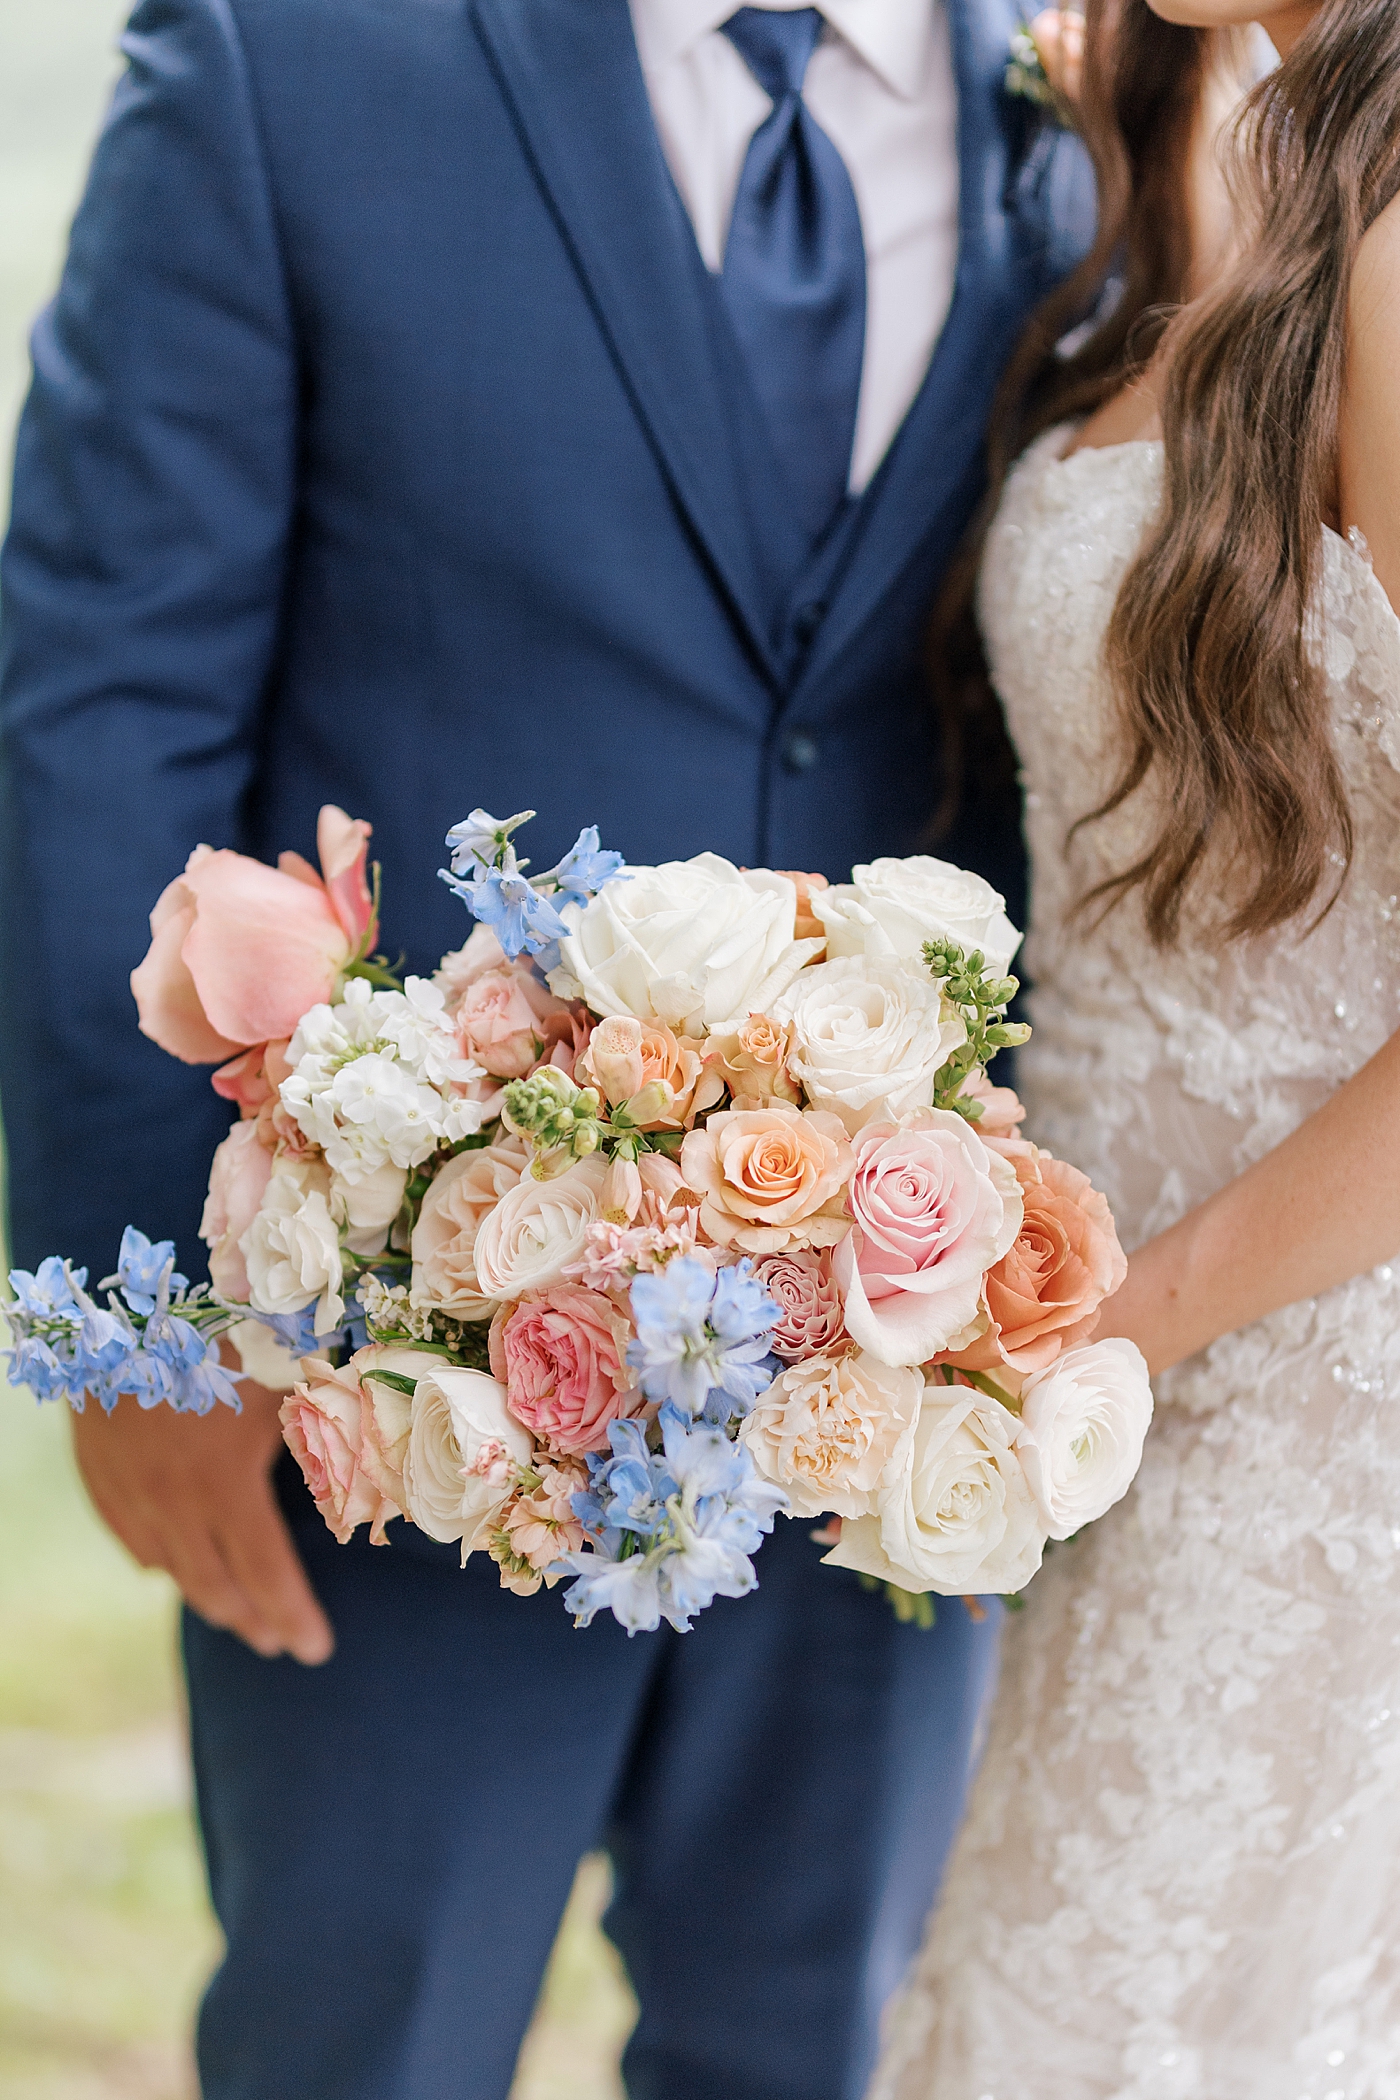 Detail of brides bouquet with pink and blue flowers | Image by Hope Helmuth Photography 